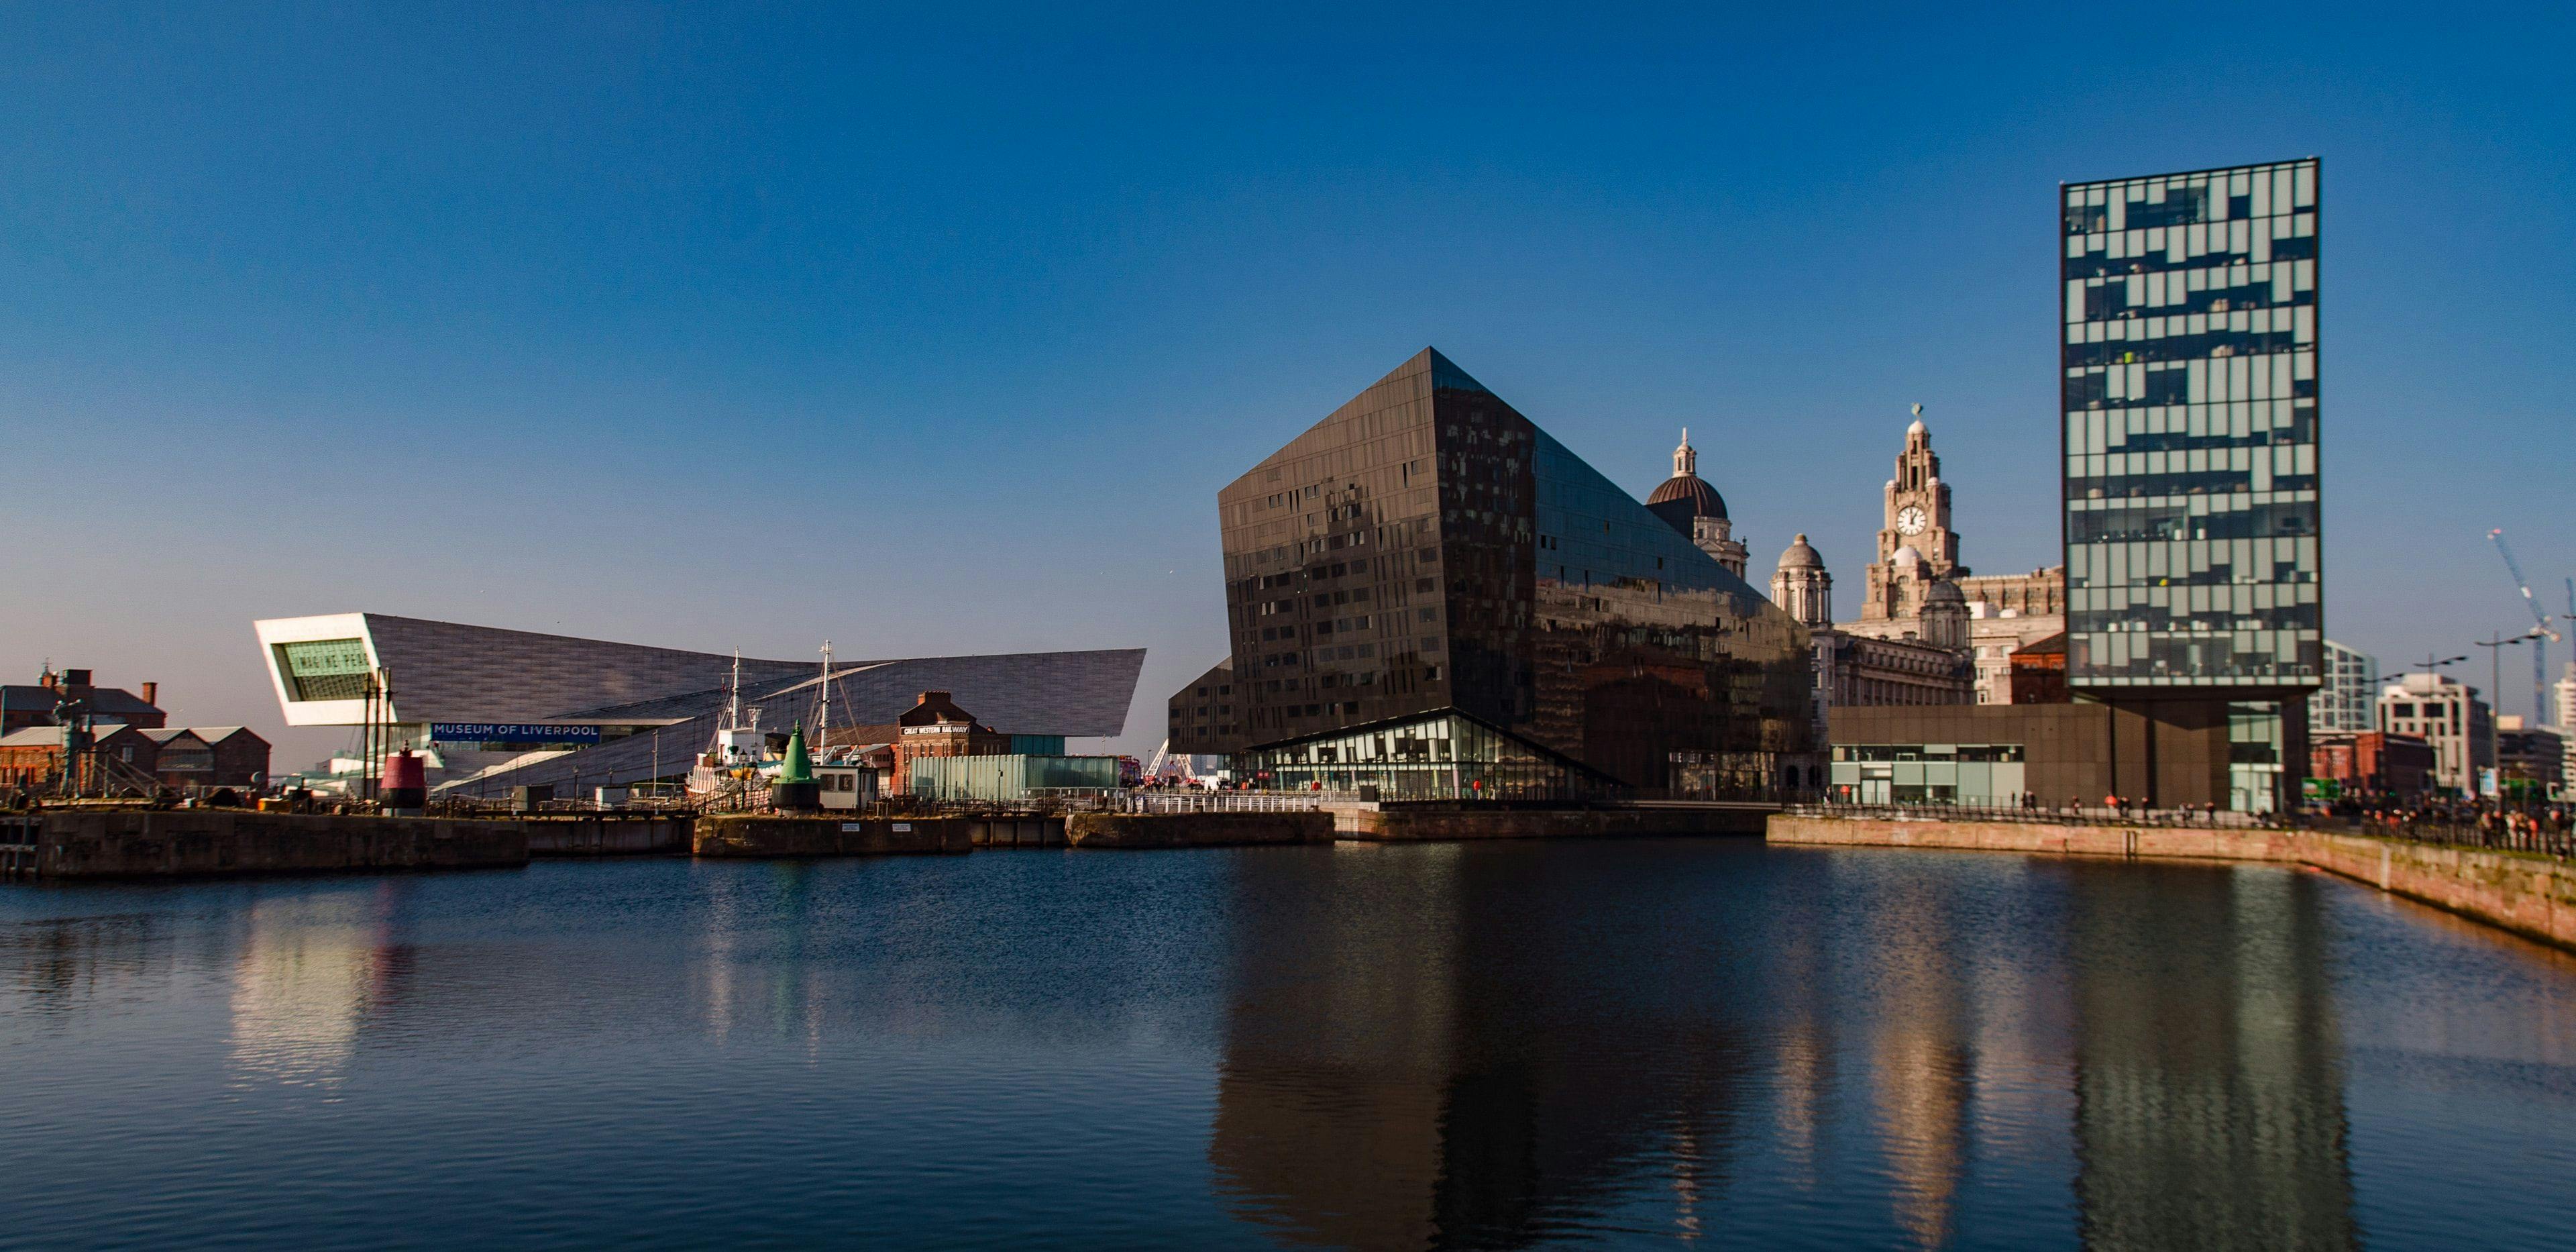 View on Amber Dock in Liverpool United Kingdom.